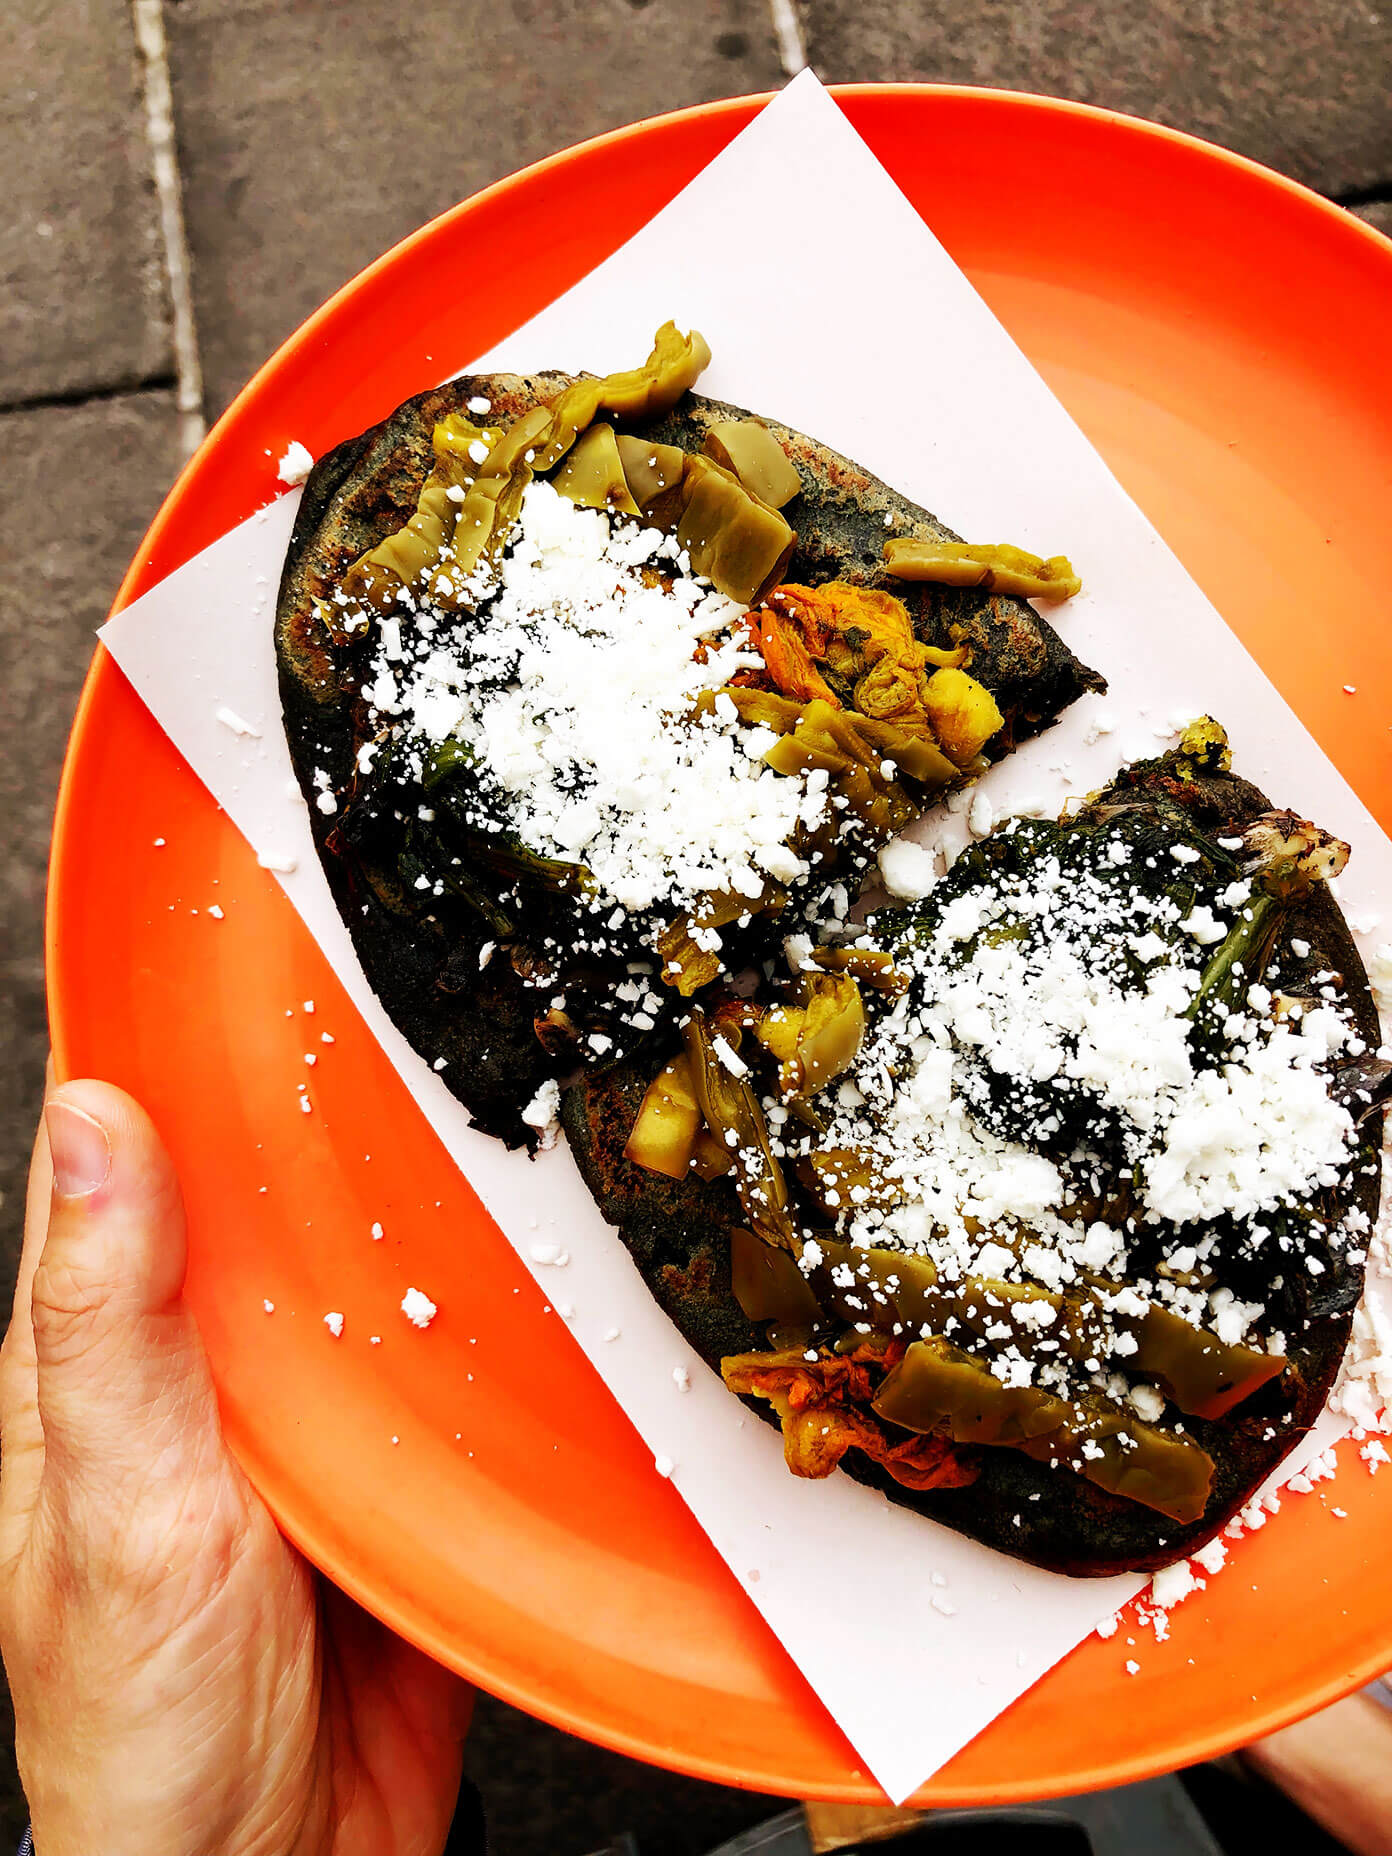 Tlacoyo Street Food | Ali's Guide To Mexico City